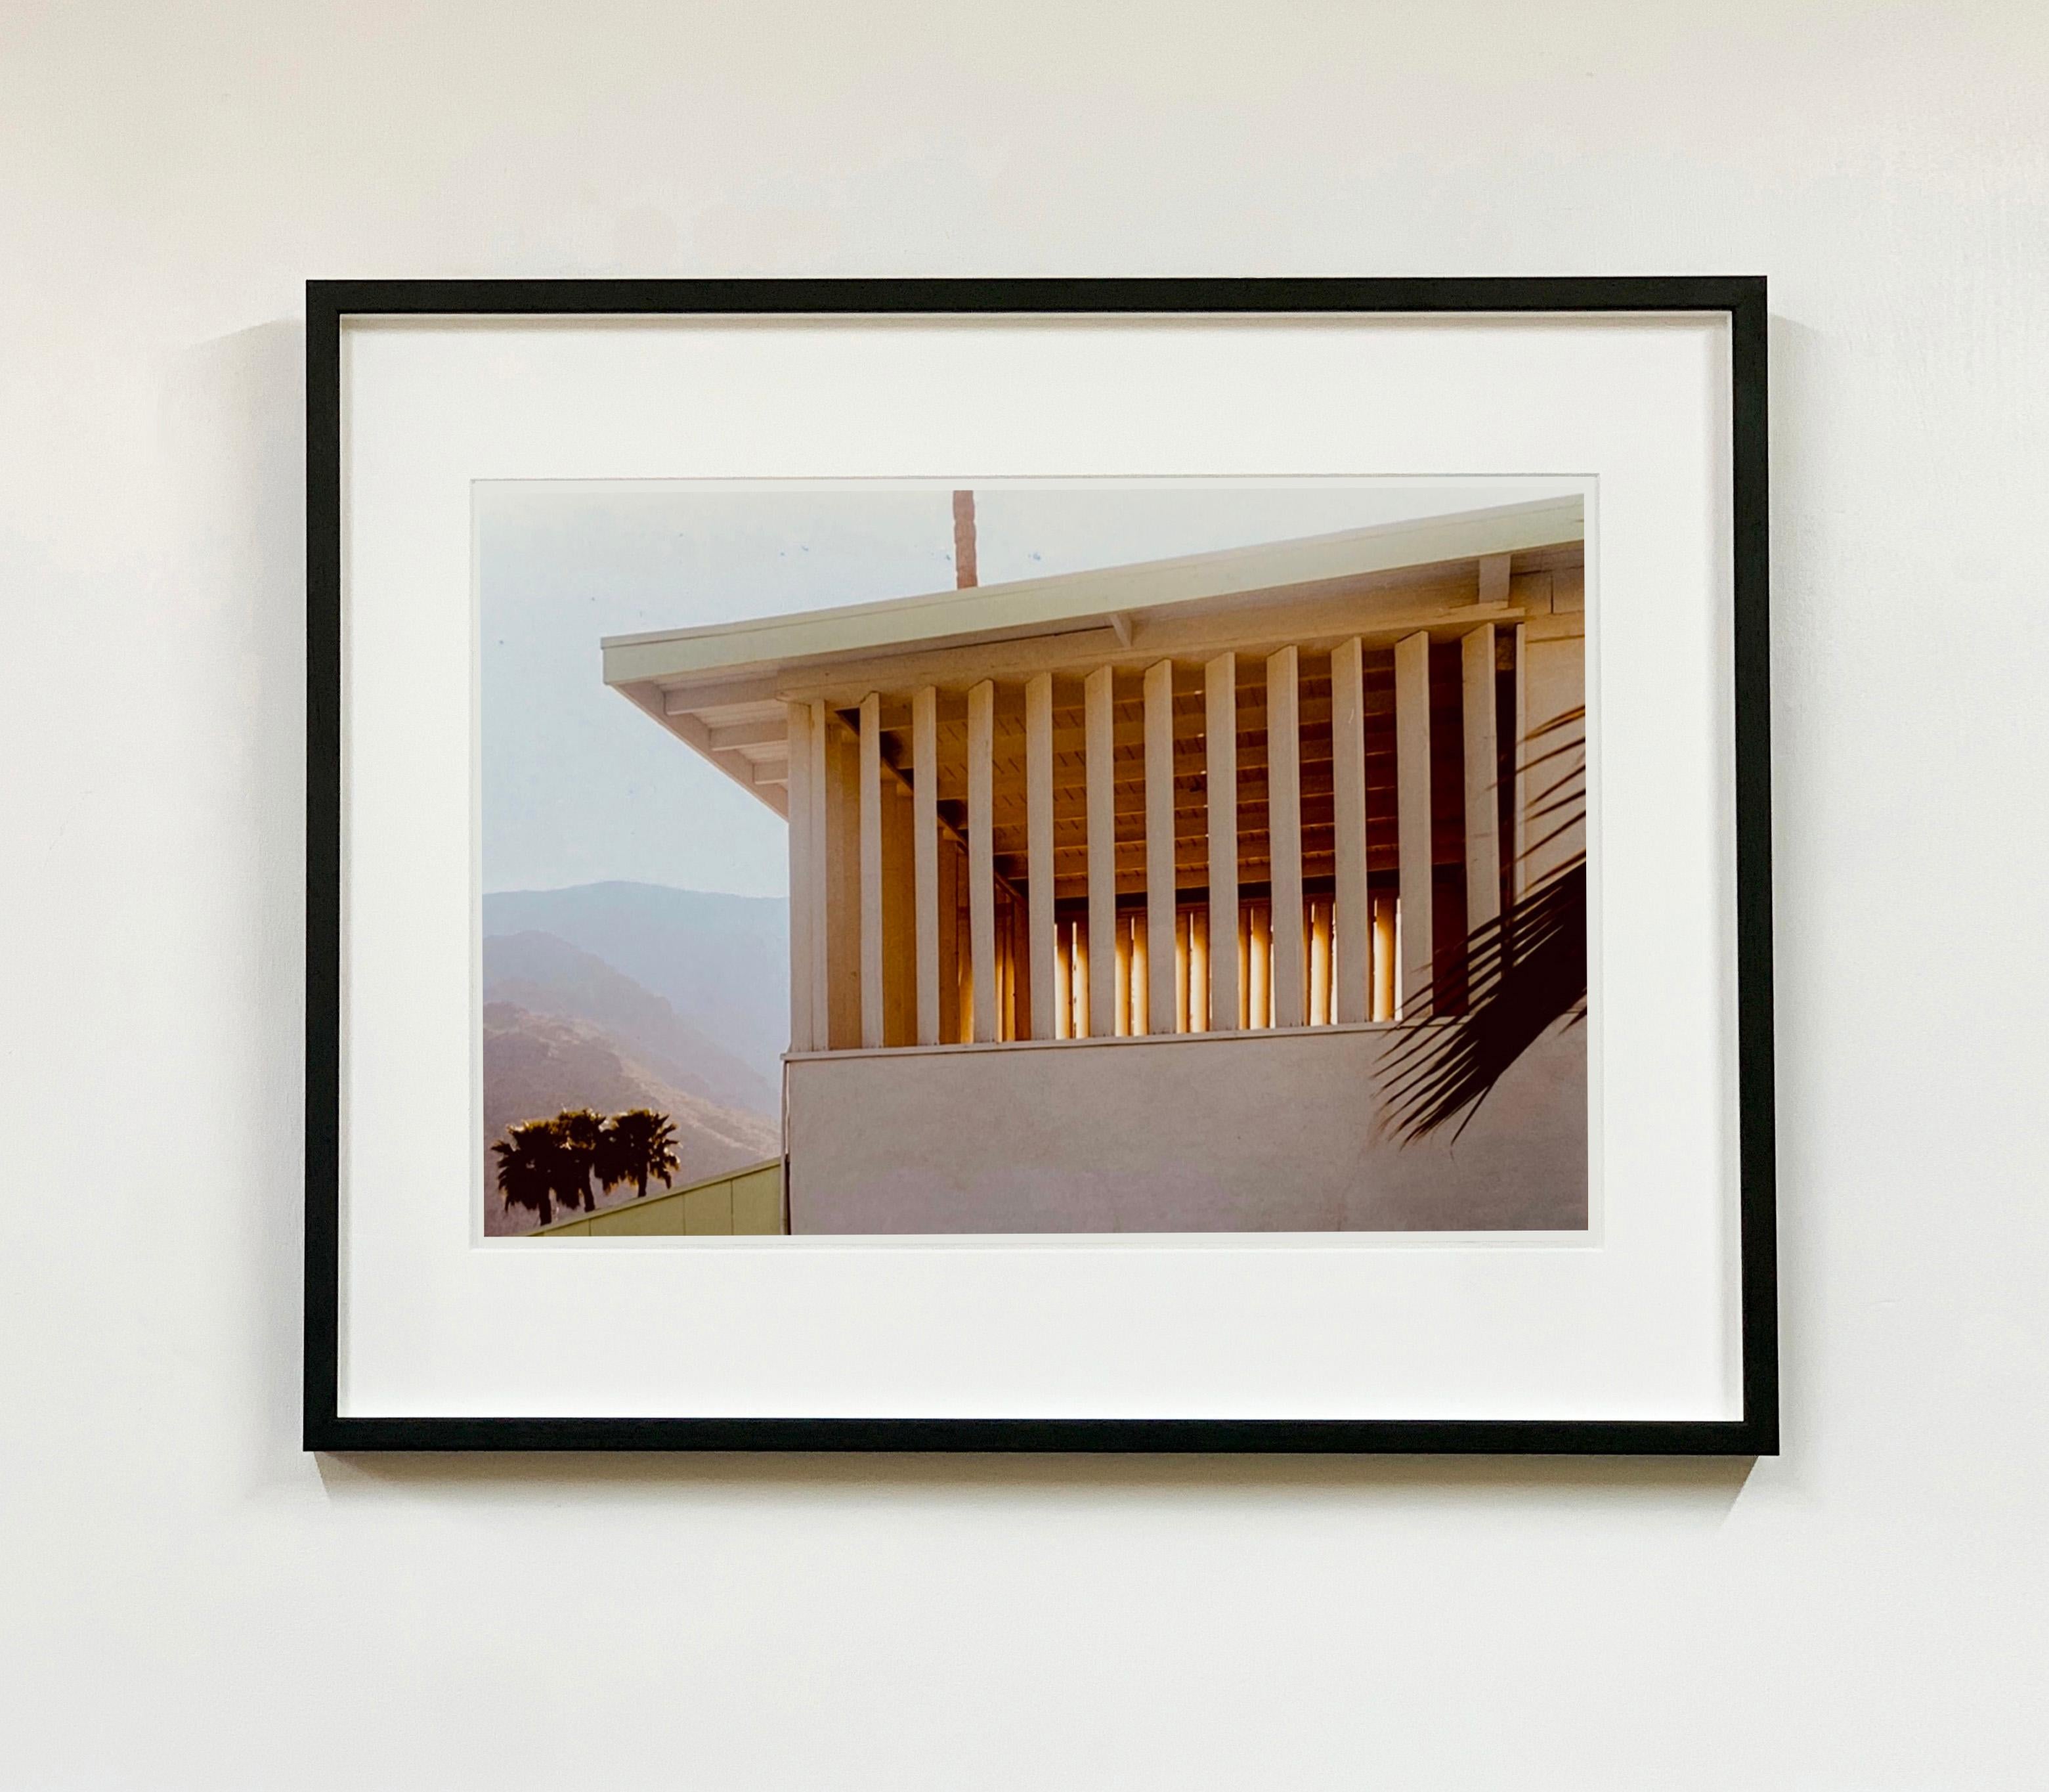 Colony at Dawn, architecture photography by Richard Heeps for his 'Dream in Colour' series, this piece features the mid-century architecture of Ballantines Movie Colony, California, captured at dawn against the Palm Springs mountain landscape.

This